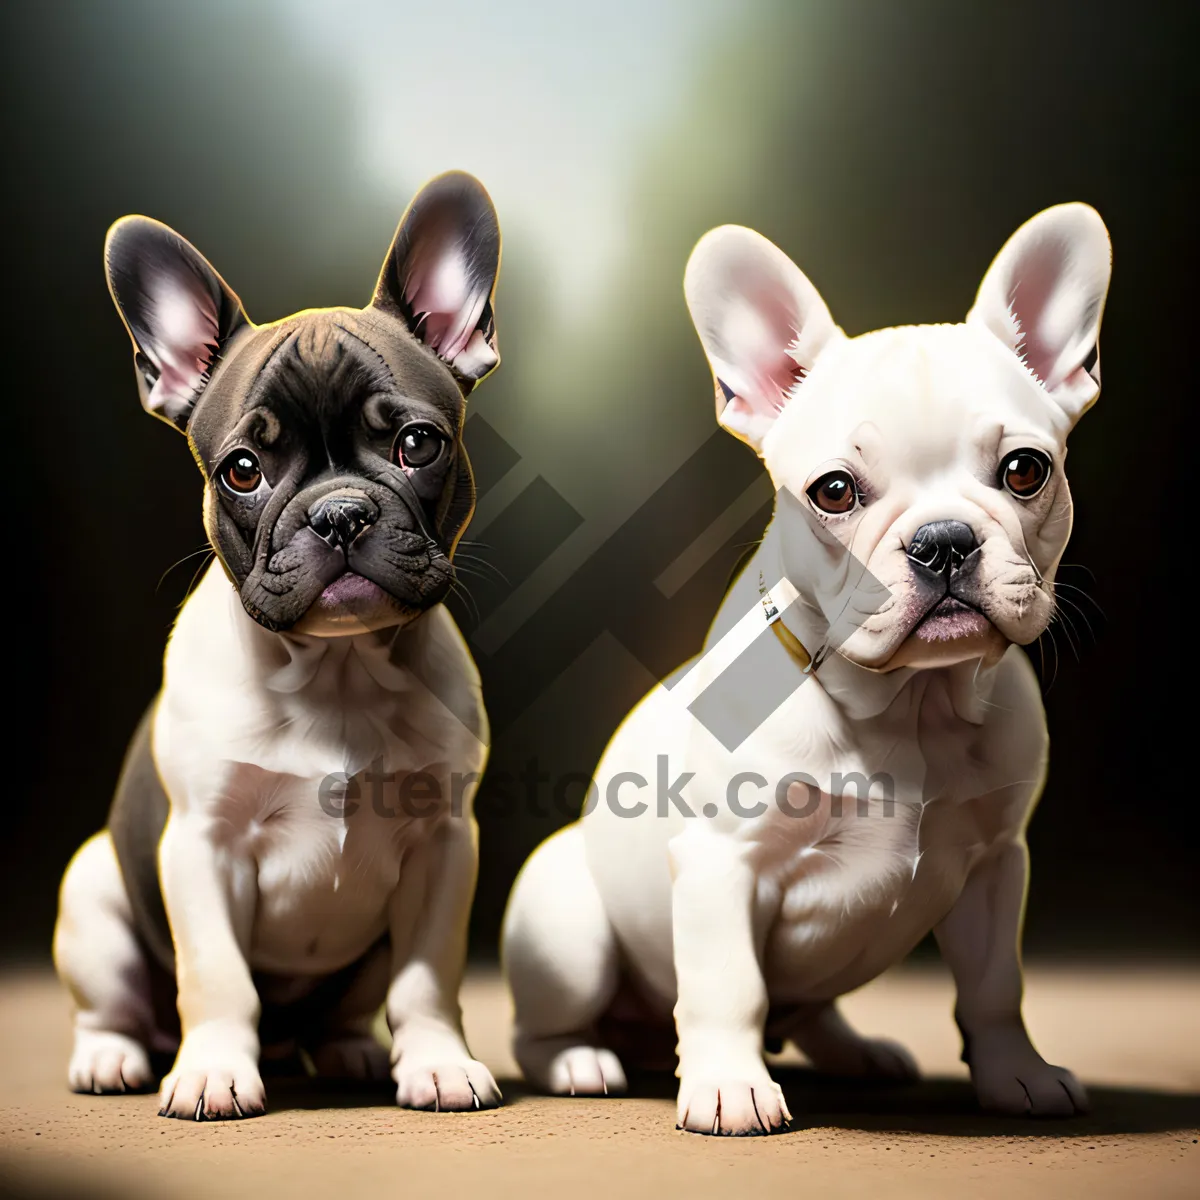 Picture of Bulldog Puppy: Adorable Wrinkle-Faced Canine Portrait